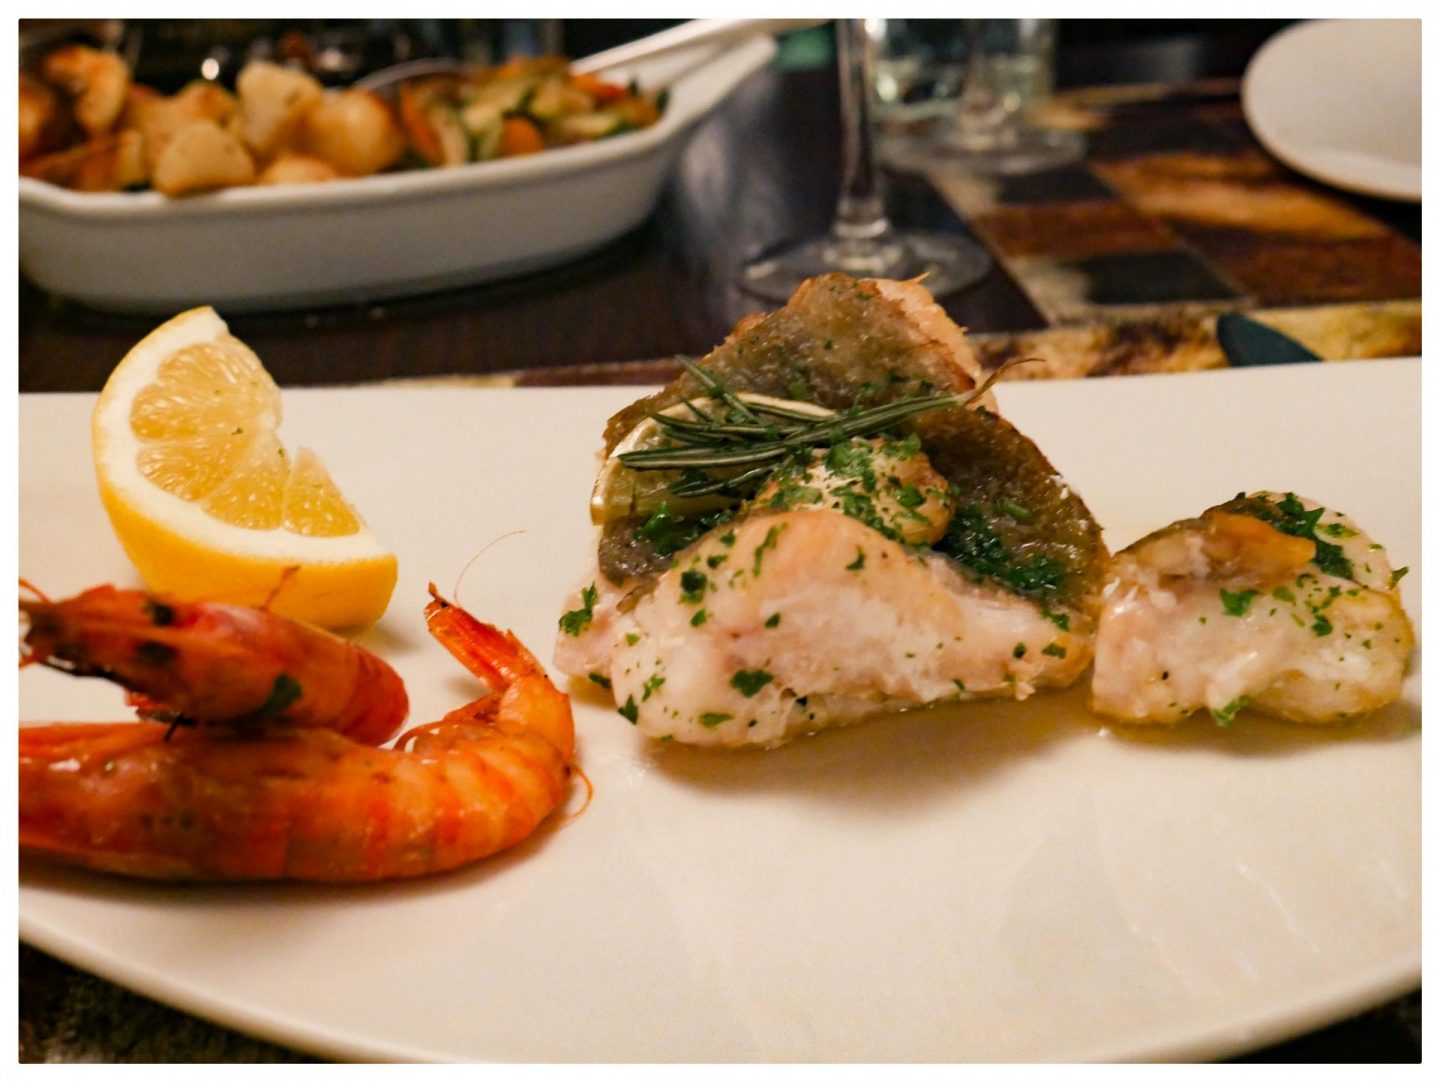 5 best places to eat and drink in Malta, including Giannini, Valetta. www.kittyandb.com